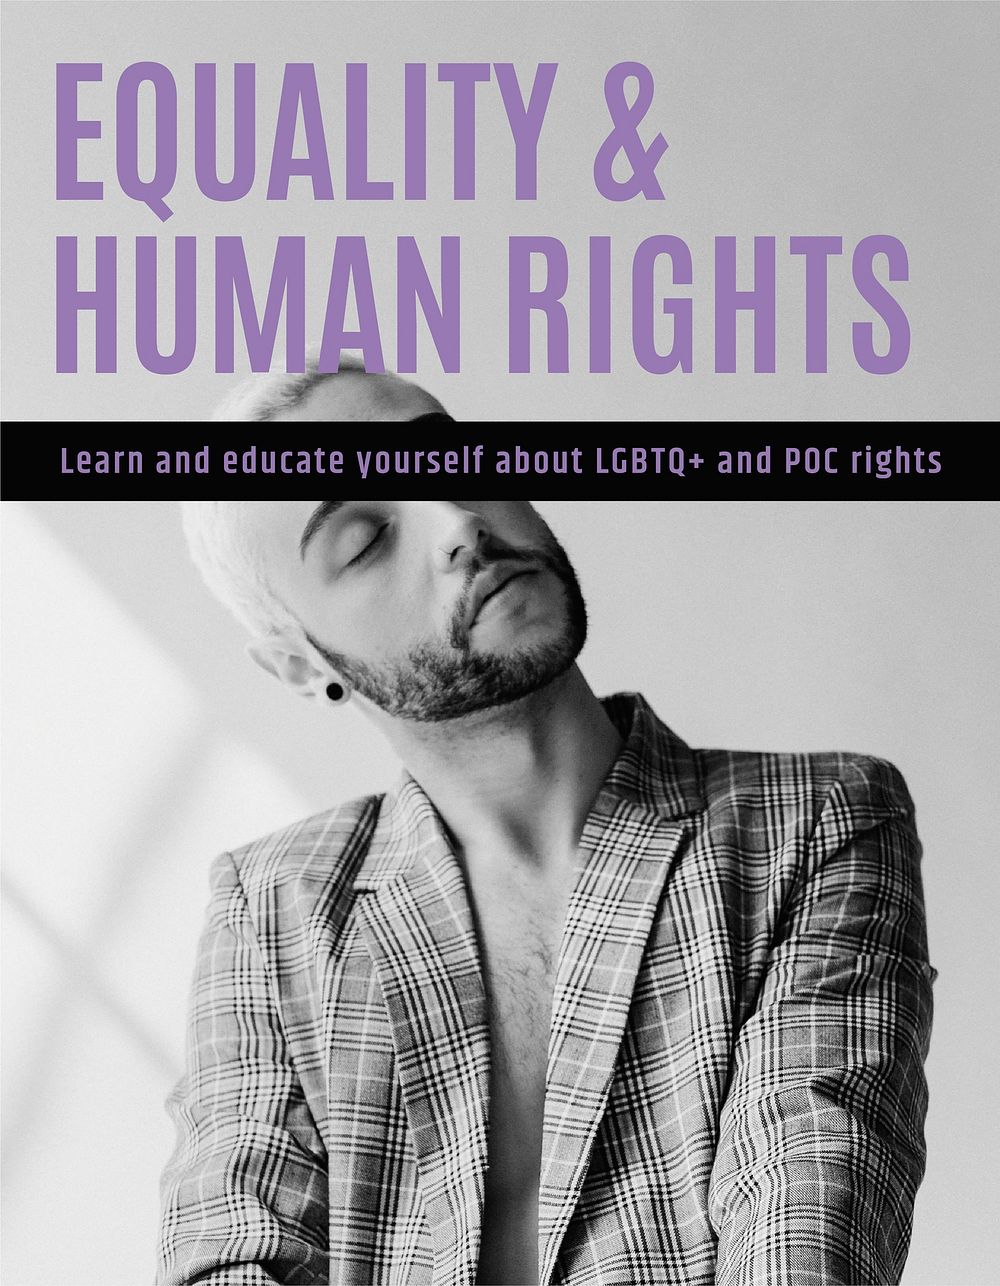 Human rights flyer editable template, LGBTQ, equality campaign vector